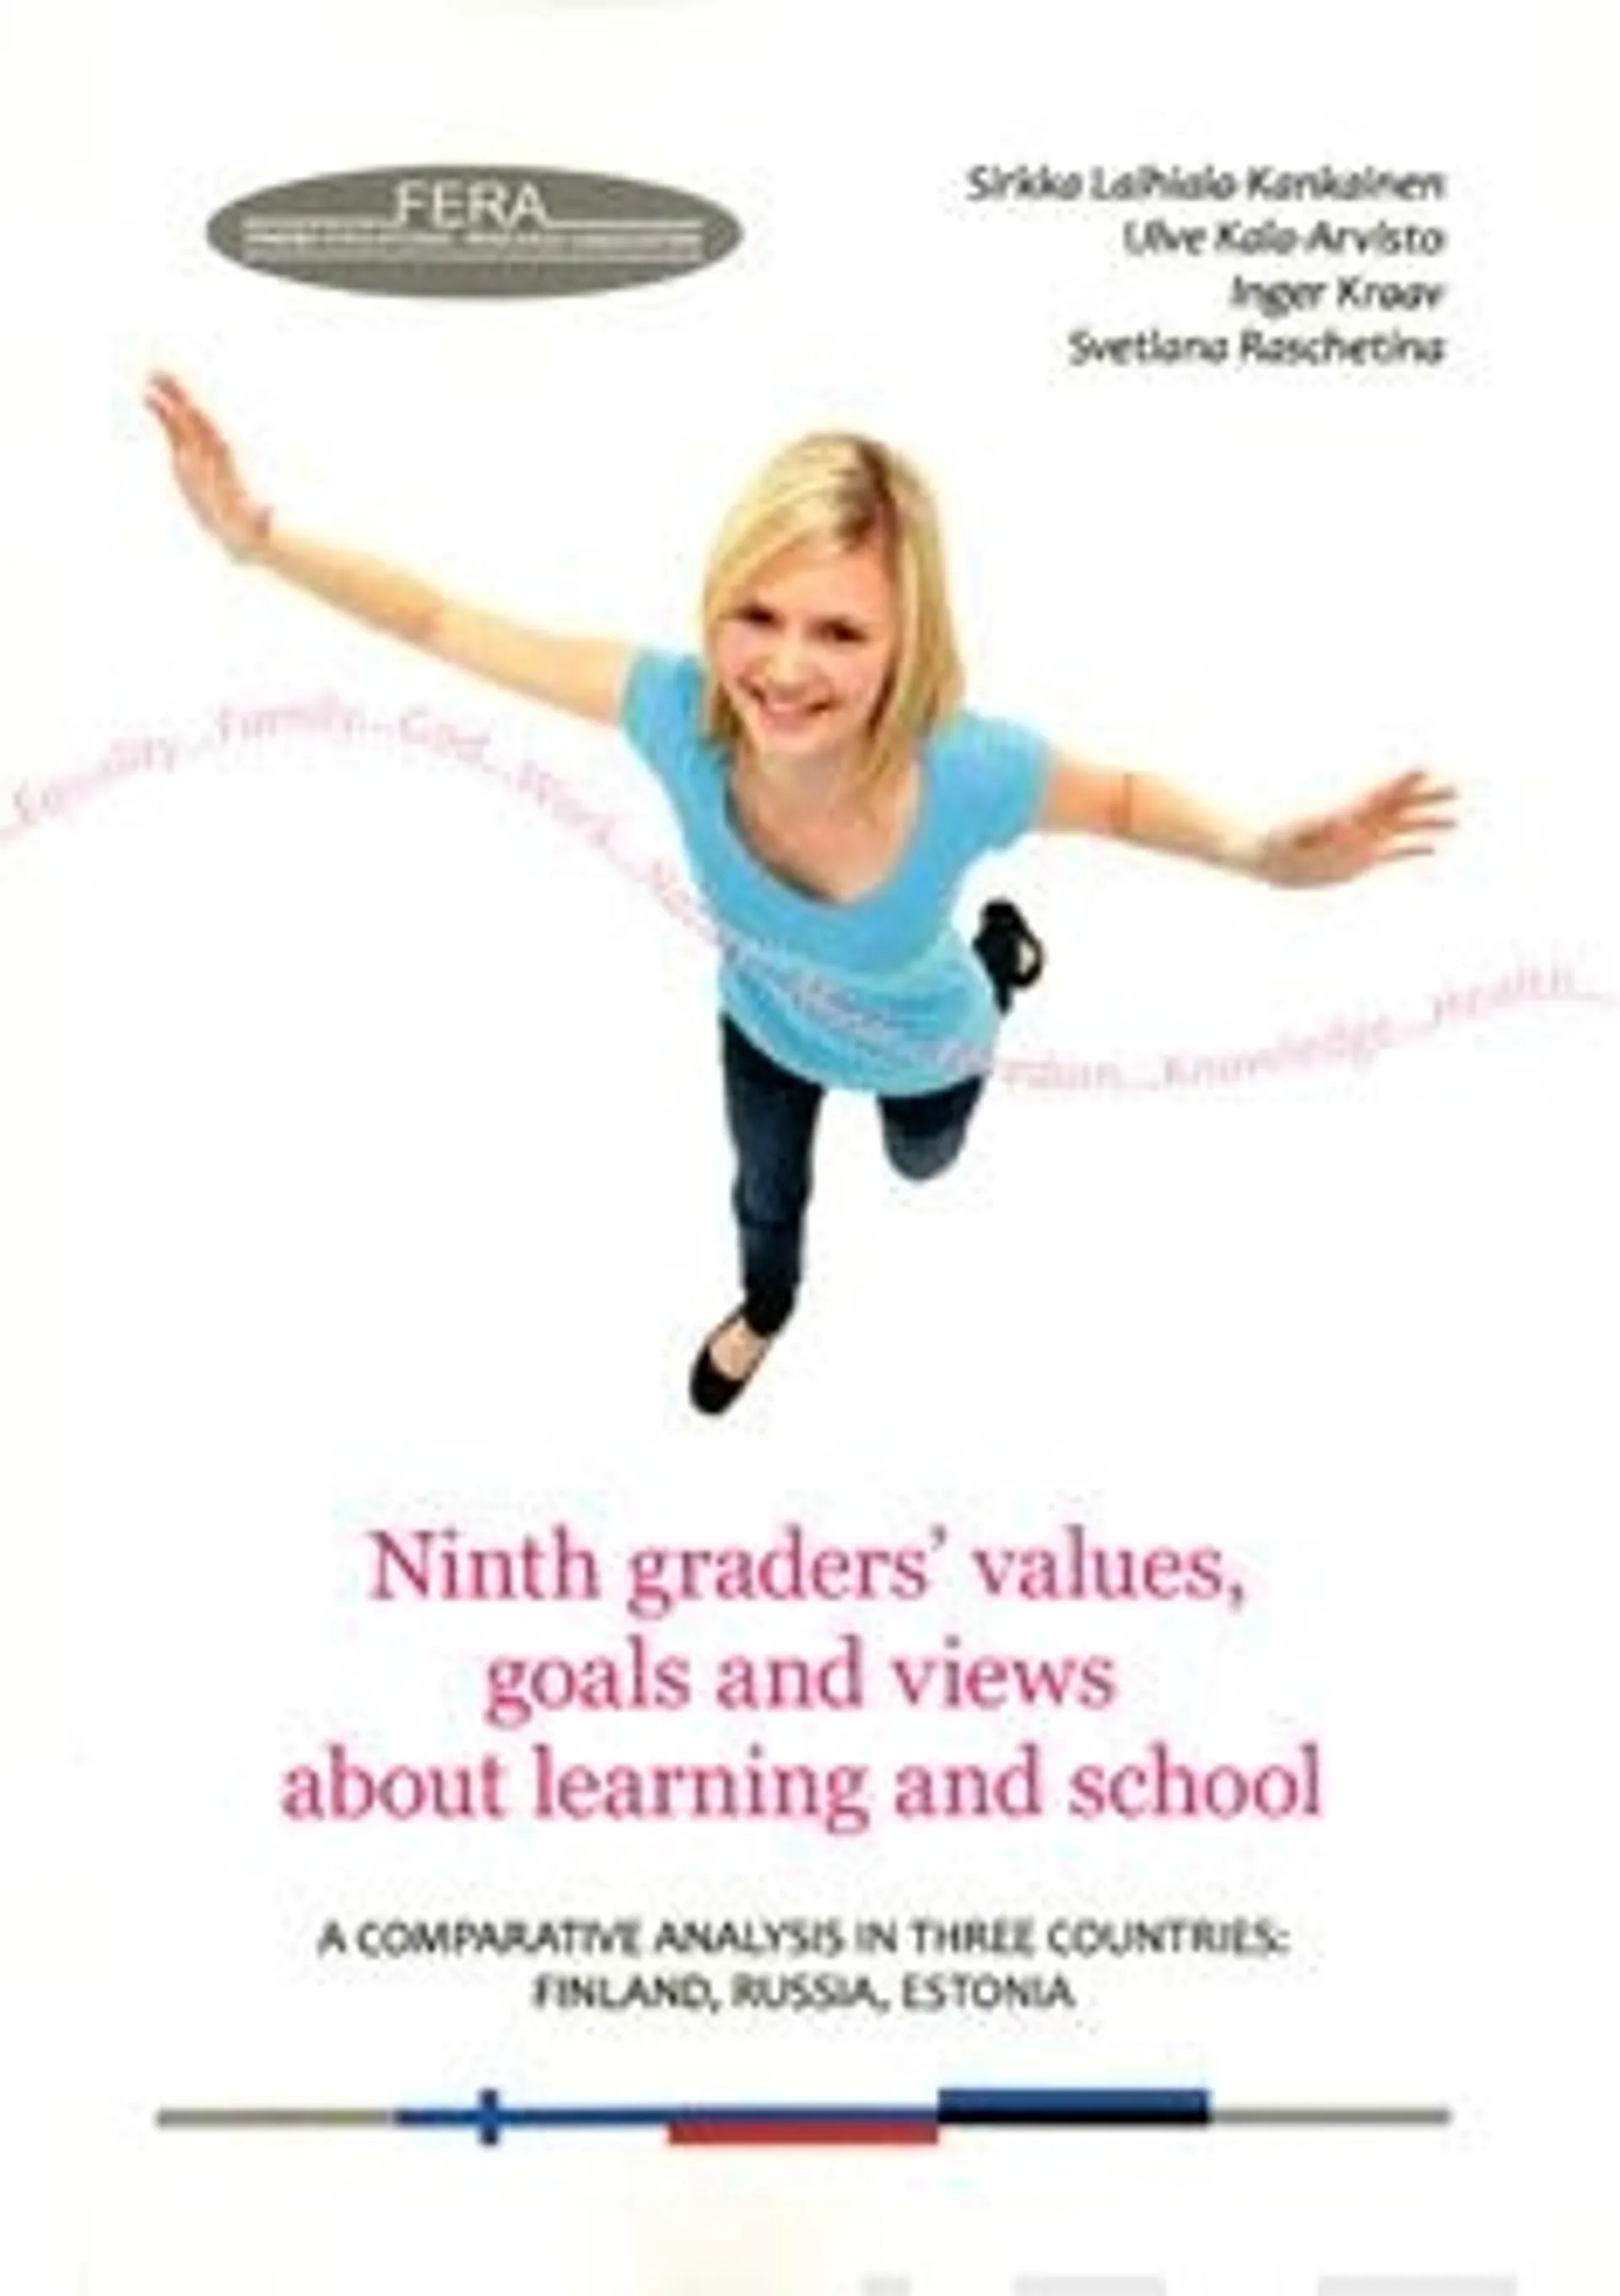 Ninth graders values, goals and views about learning and school - a comprative analysis in three countries: Finland, Russia, Estonia